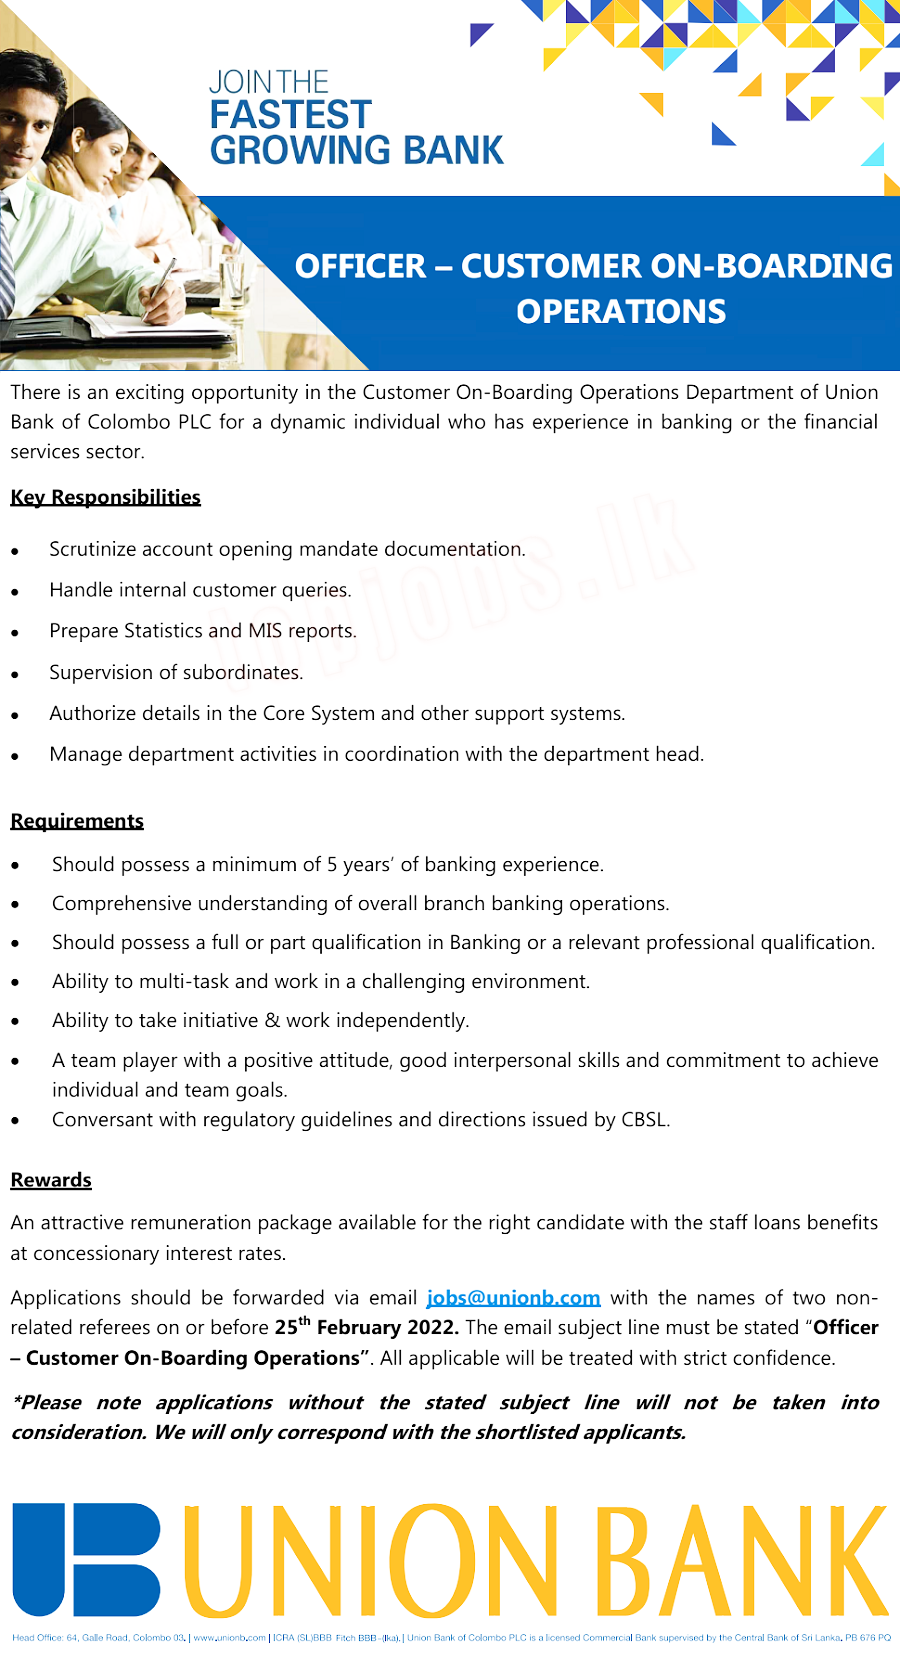 Union Bank Officer of Customer on Boarding Operations Jobs Vacancies